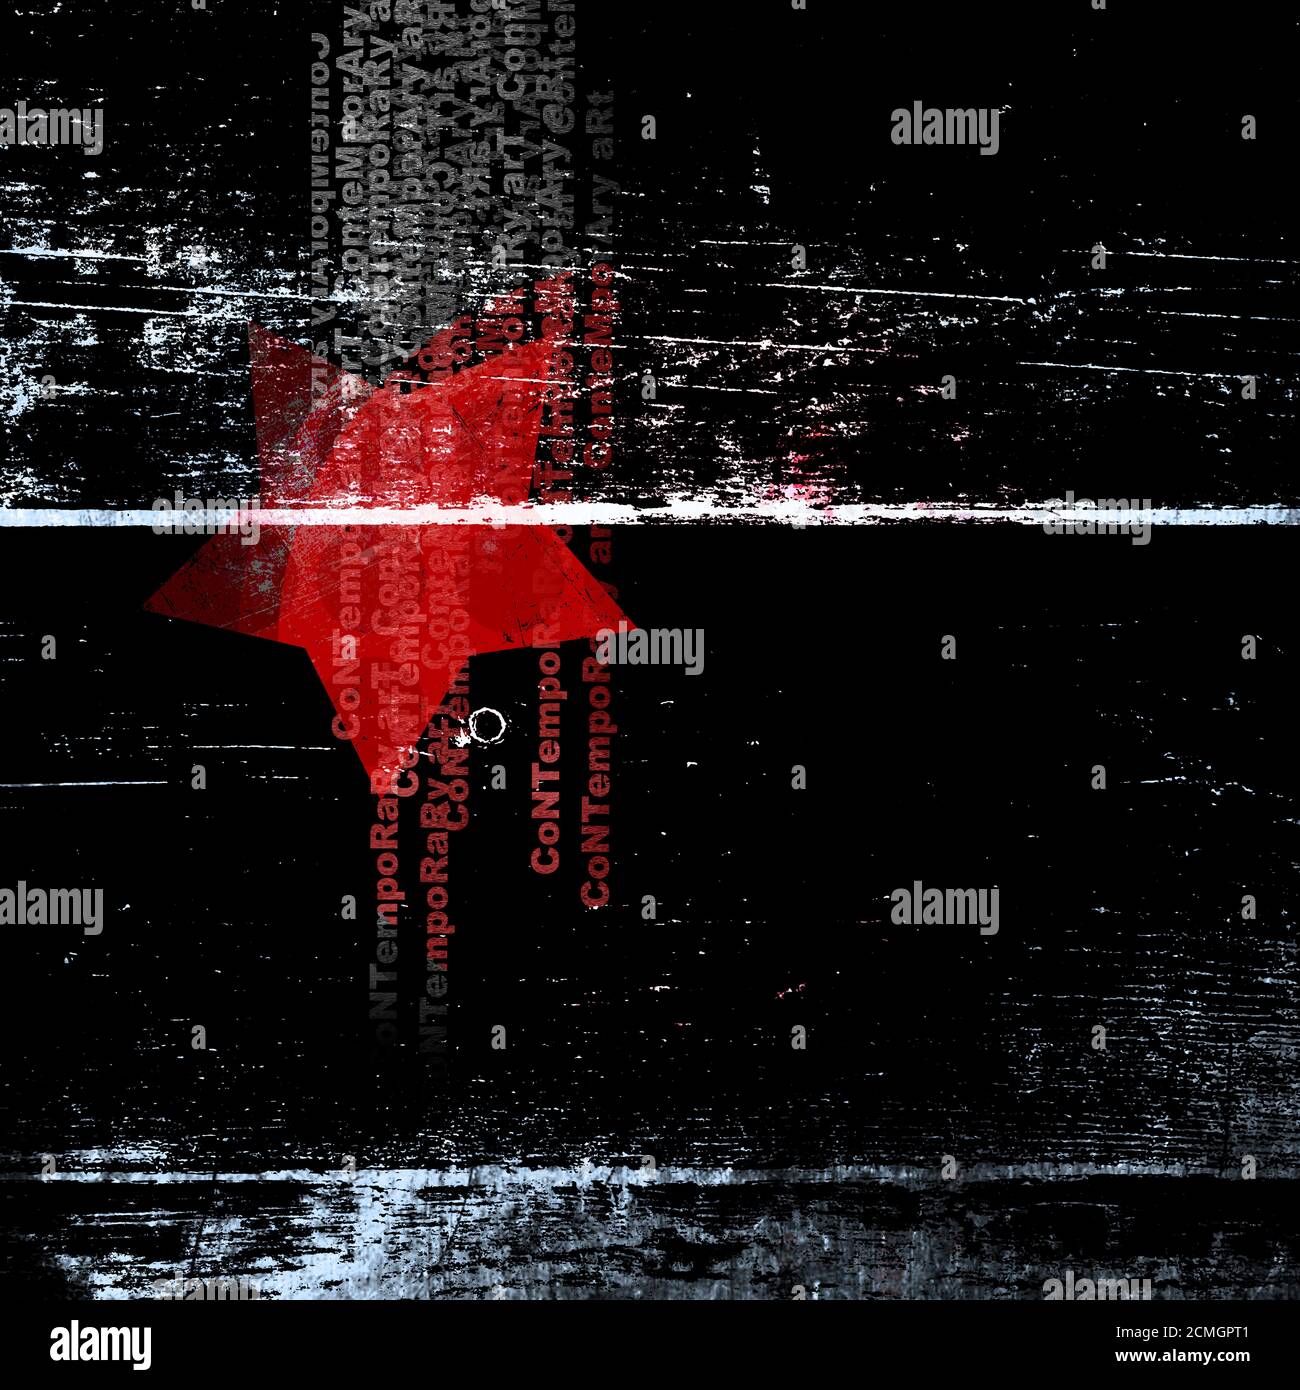 Black poster with a red star and abstract text. Stock Photo